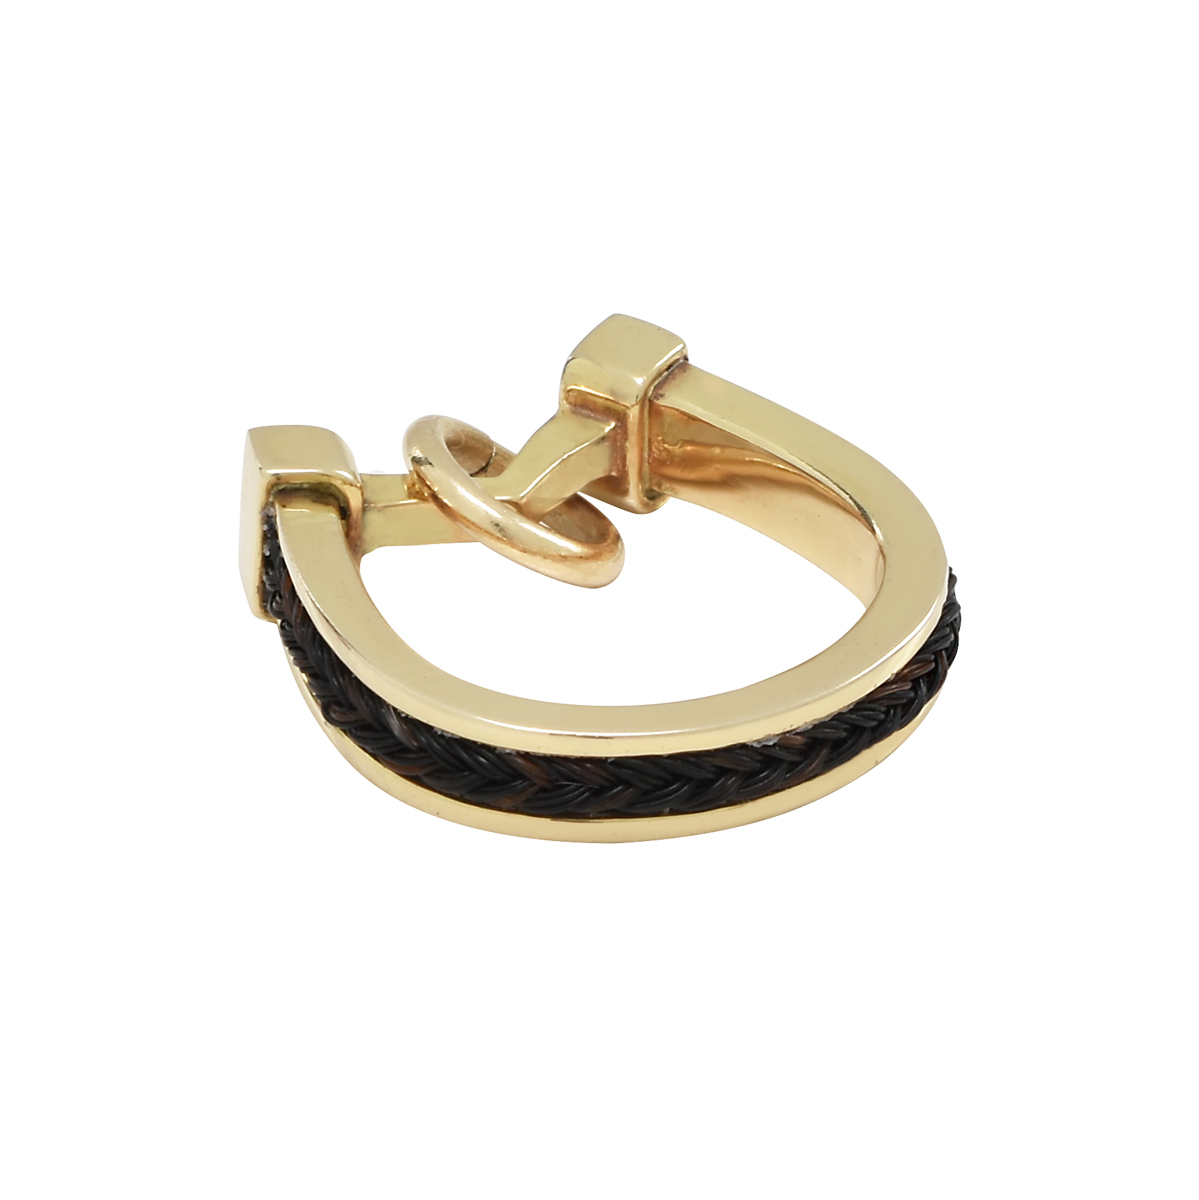 Gold horseshoe charm with horsehair braid inset.